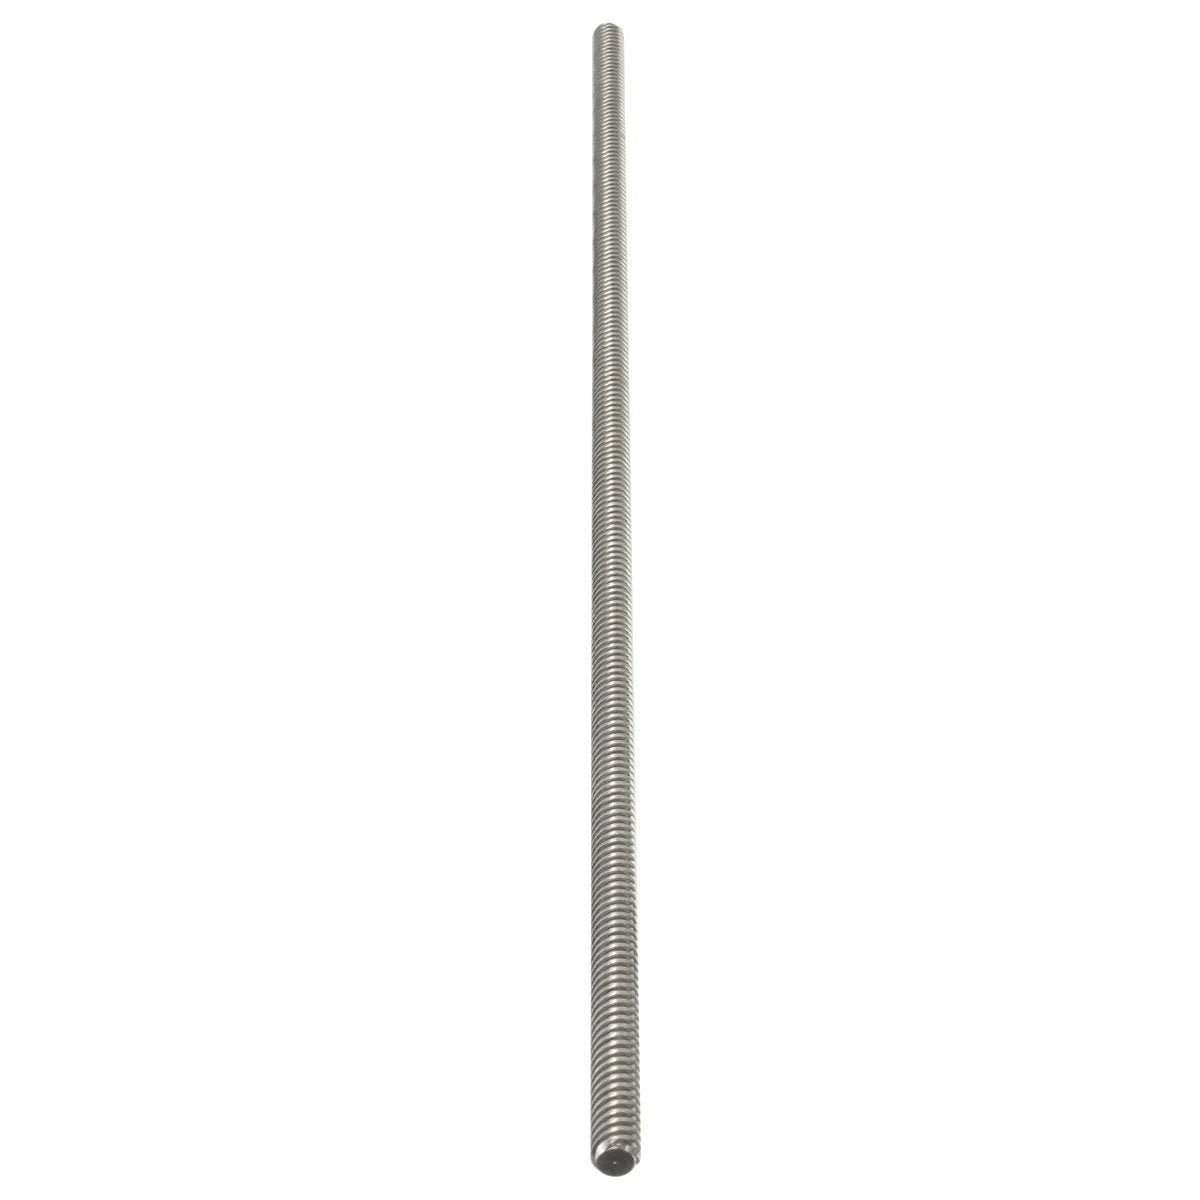 300mm Z-Axis Stainless Steel Threaded Rod Lead Screw with T8 Nut